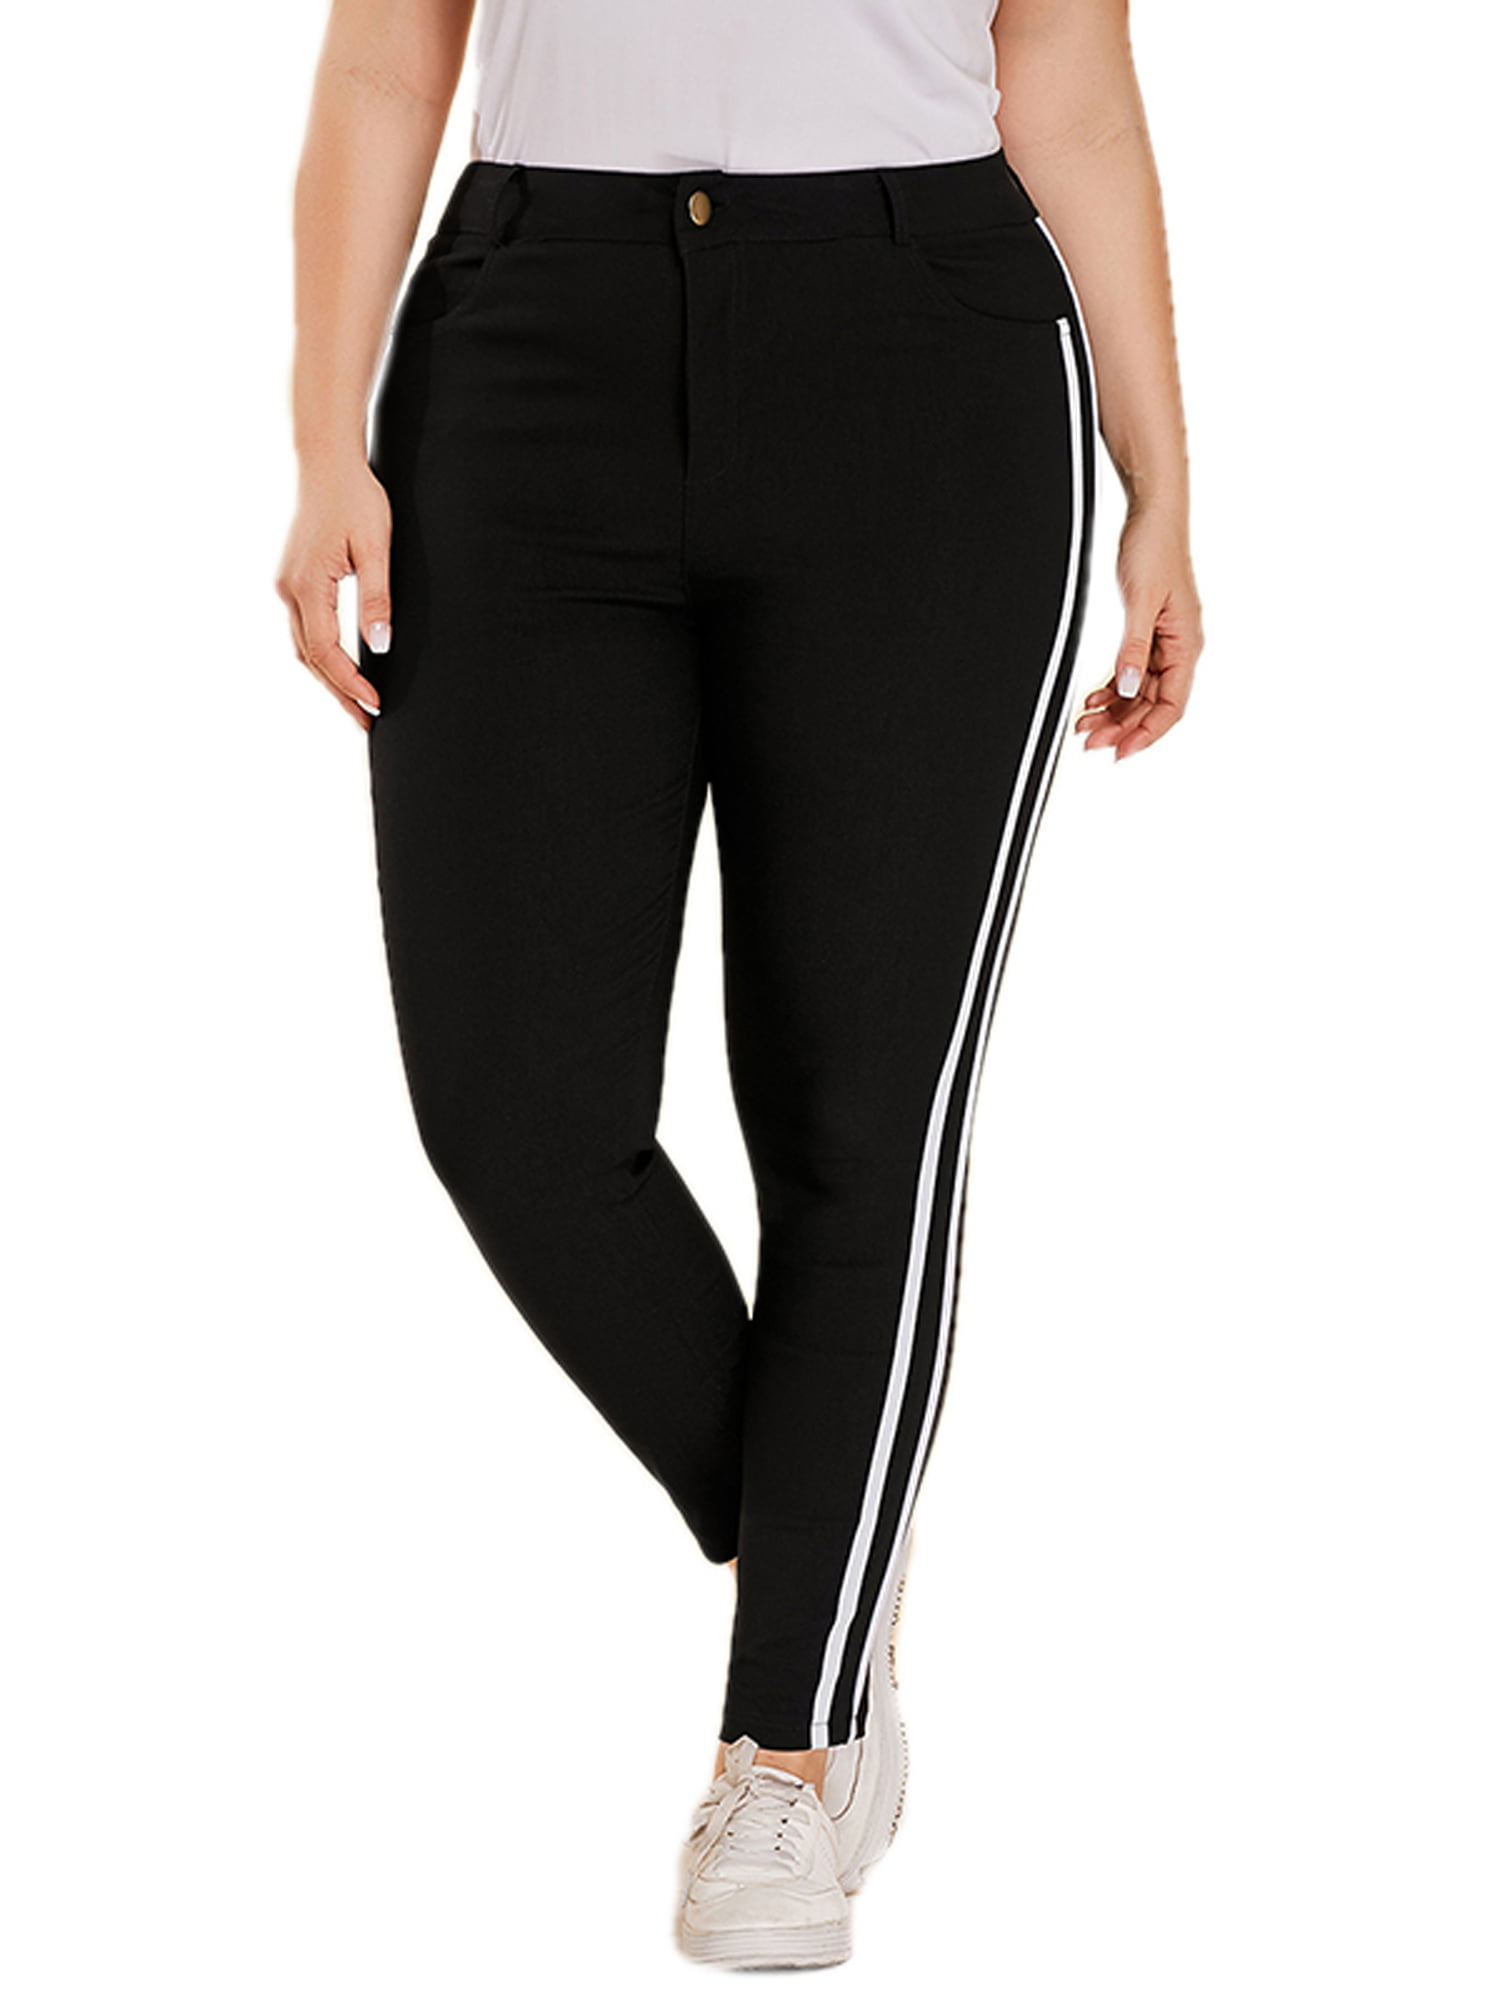 Women's Sports Striped Plus Size Leggings Gym Pants Stretchy Running ...